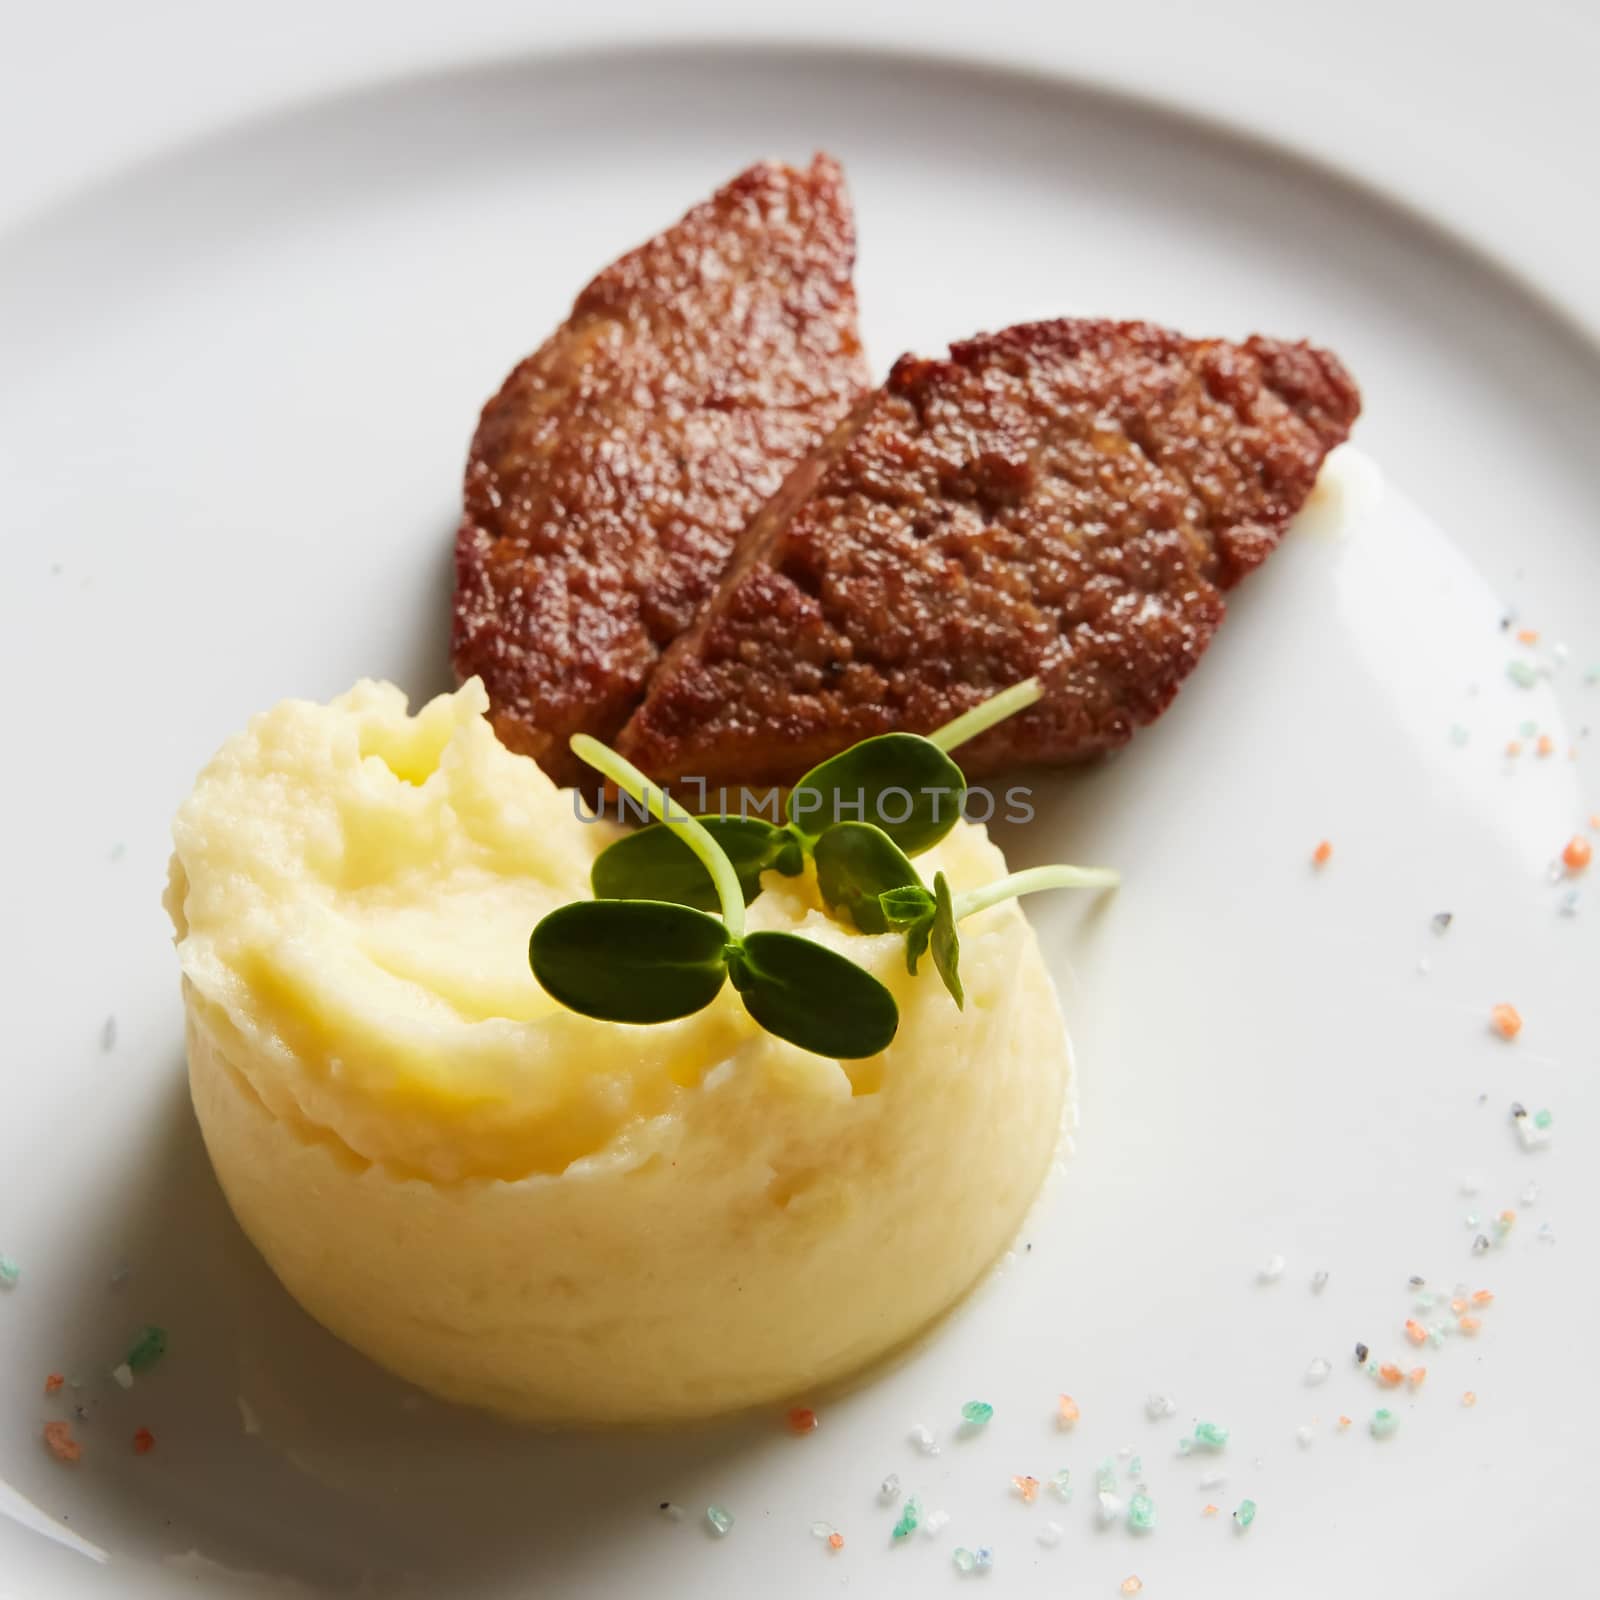 delicious mashed potatoes sprinkled with greens, juicy meat cutlets.